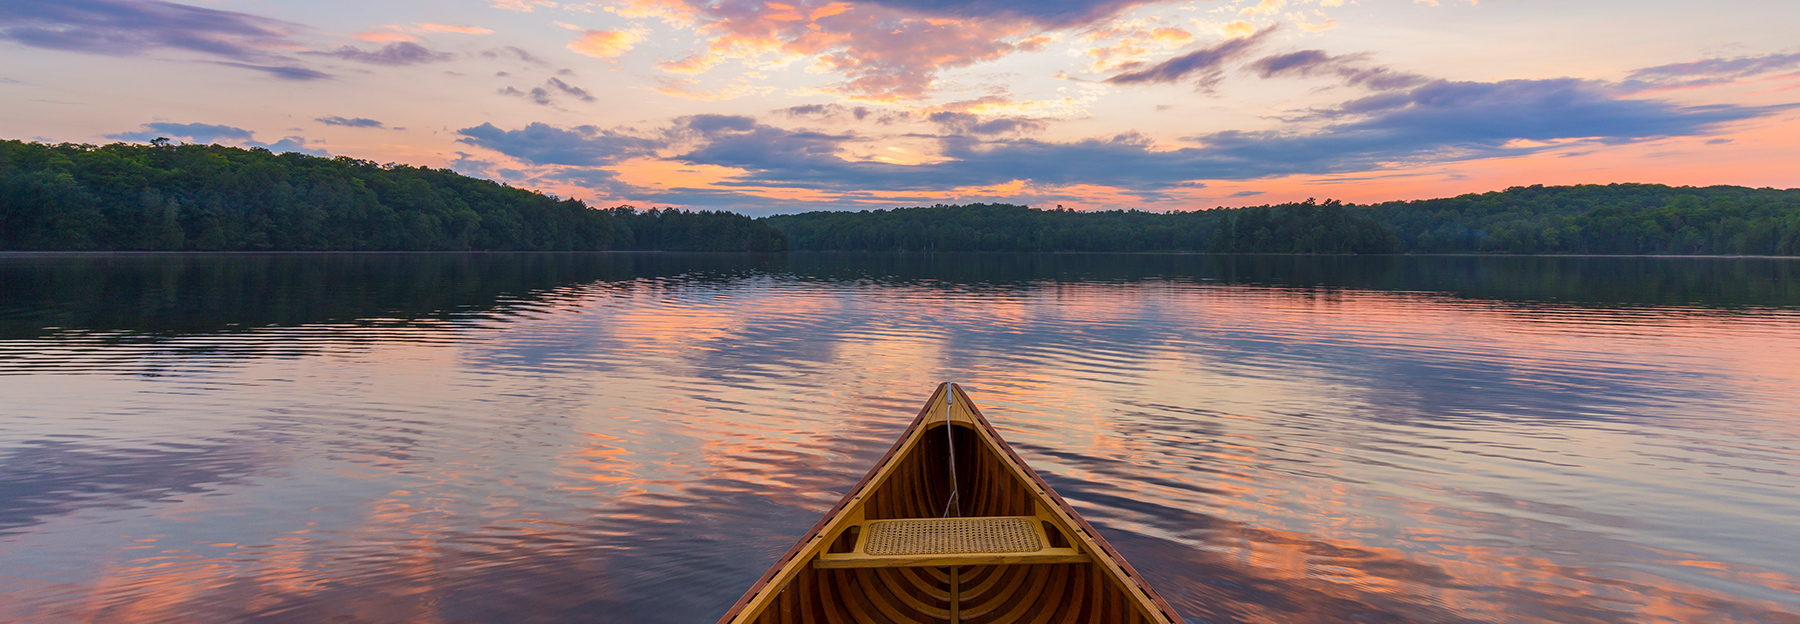 A wooden canoe out in its element on a serene lake.